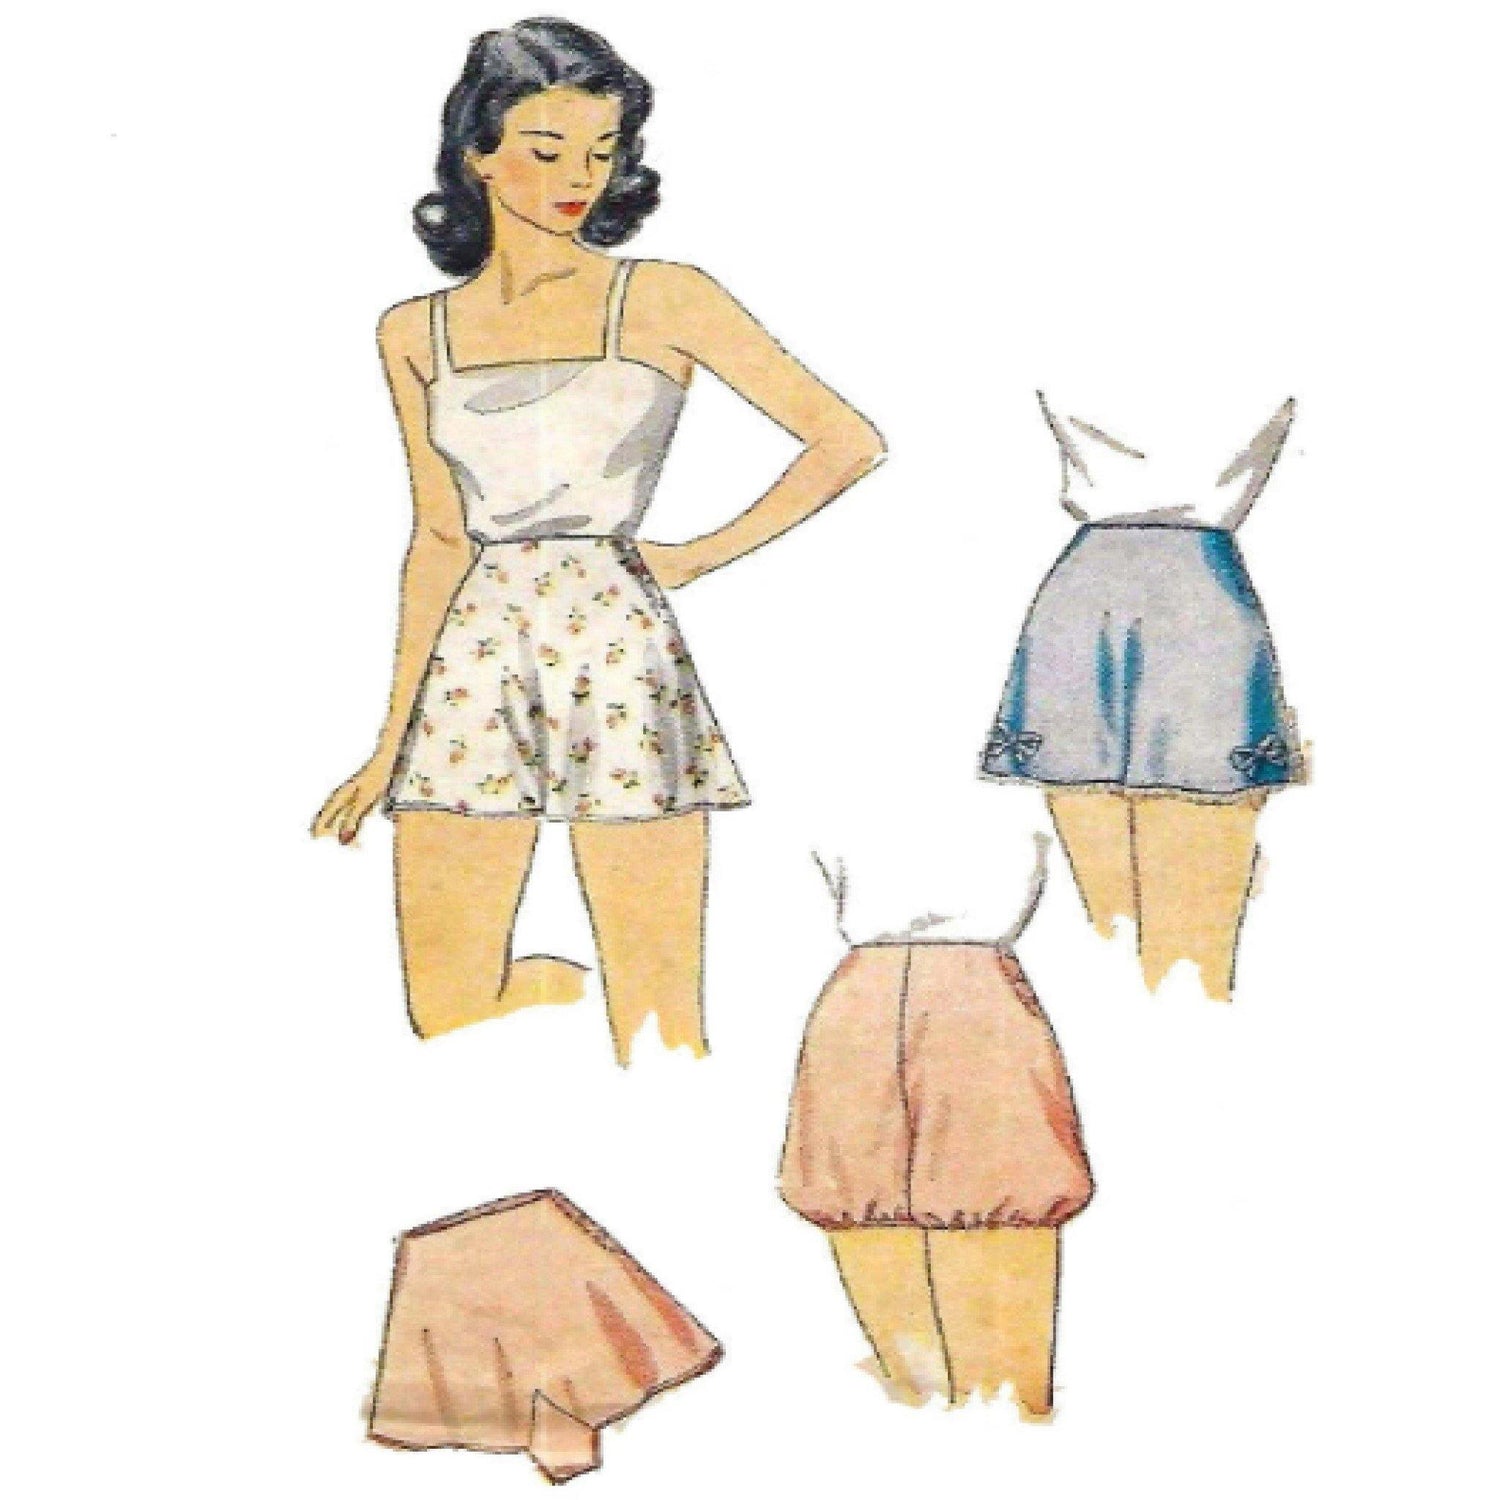 Sewing pattern cover illustration featuring a woman wearing panties and bloomers